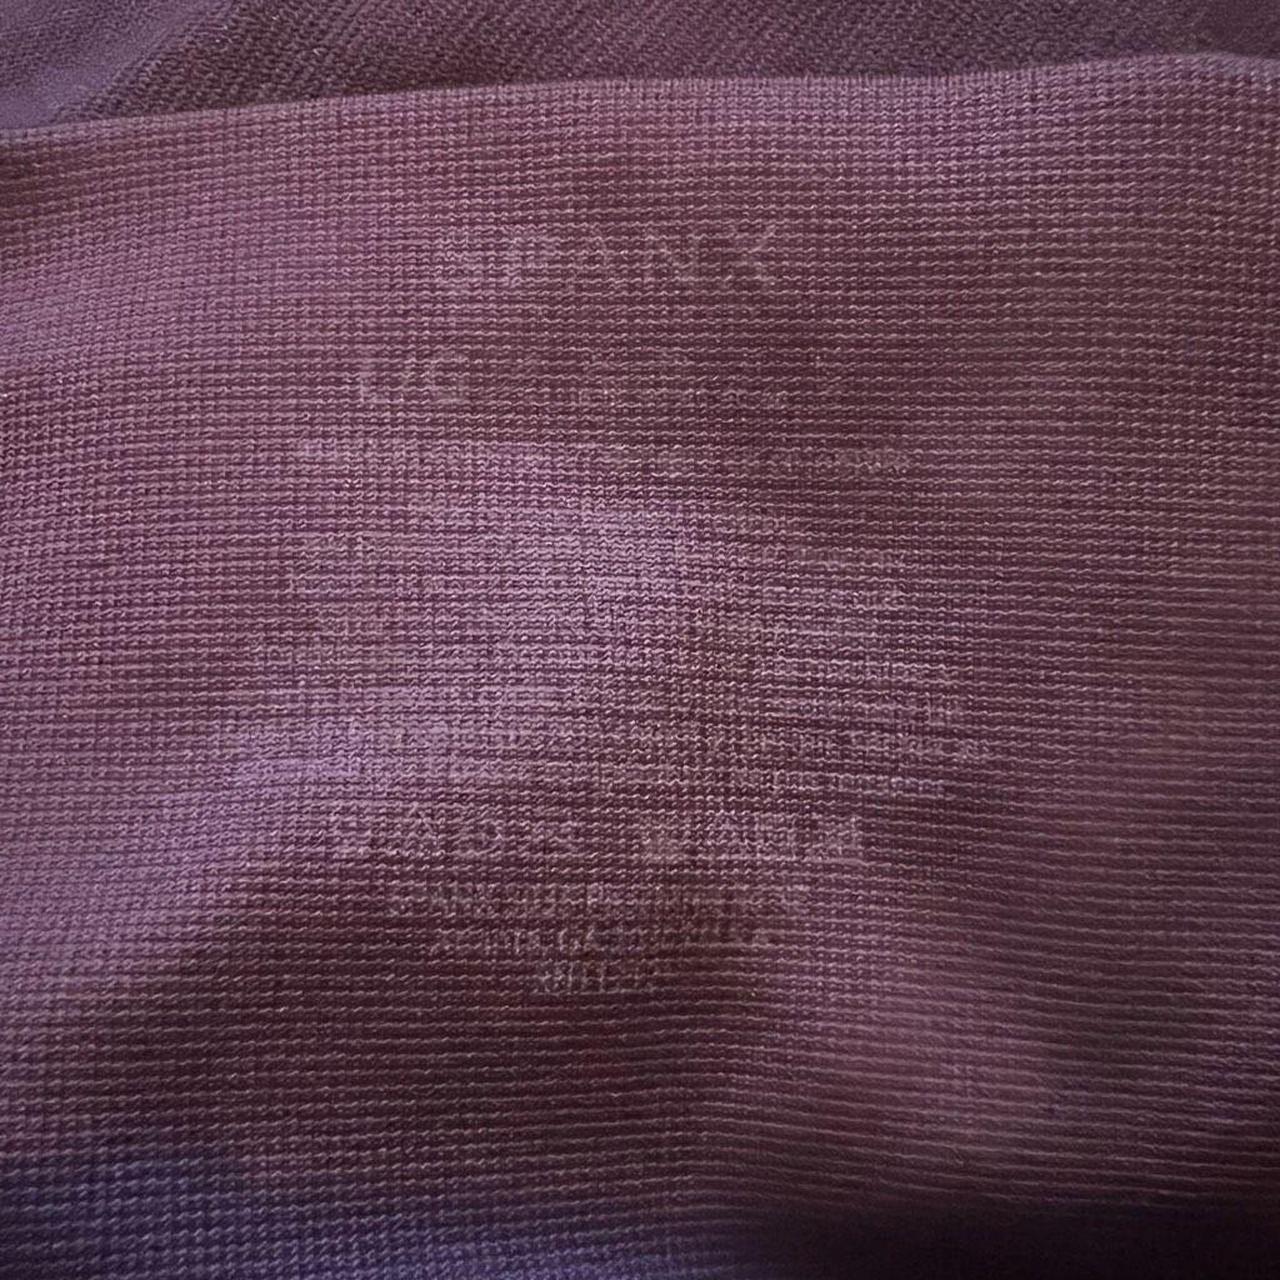 Spanx Look At Me Now Seamless Moto Leggings in Wine Size Large